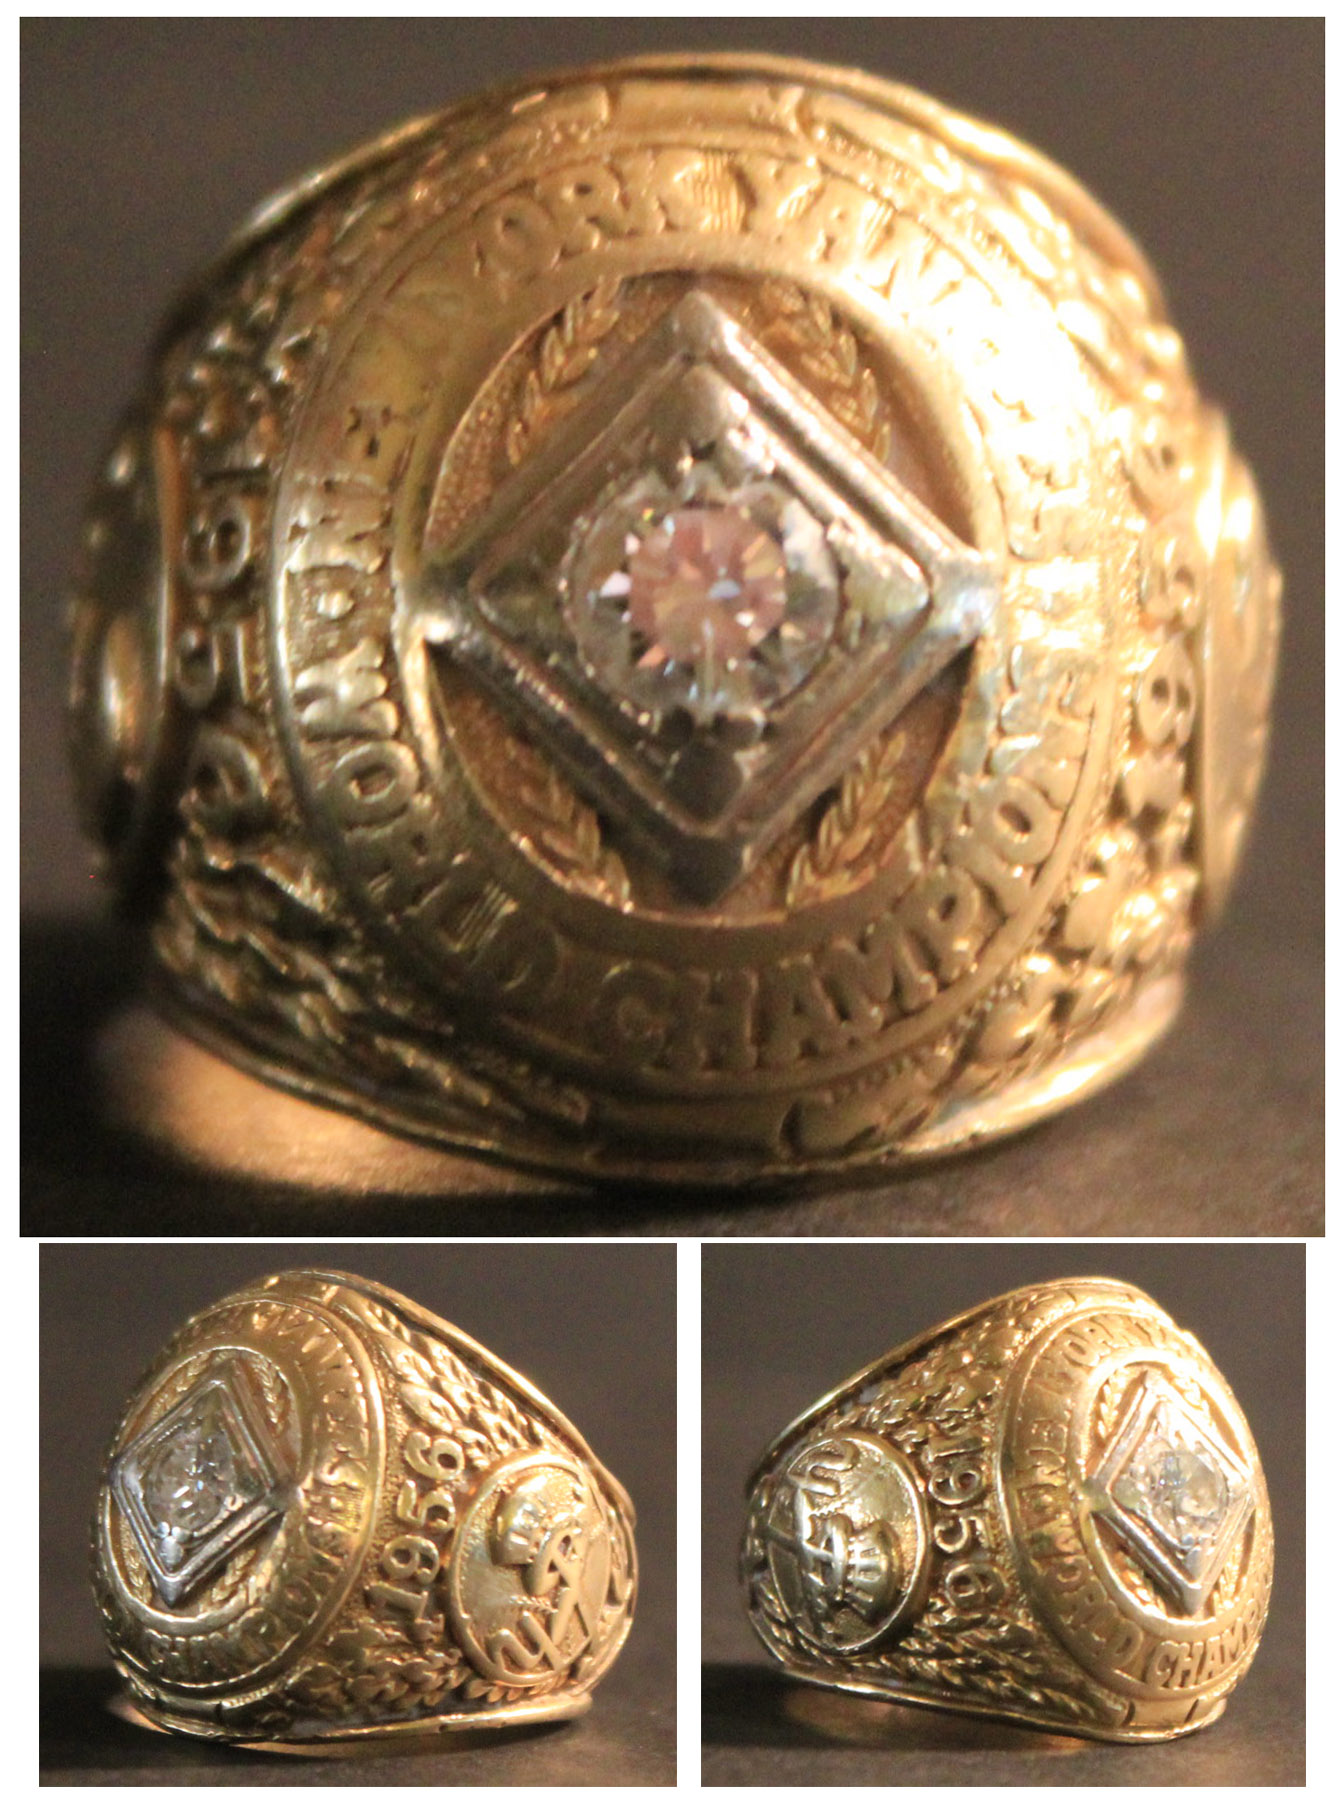 St Louis Browns 1944 World Series Champions Ring 